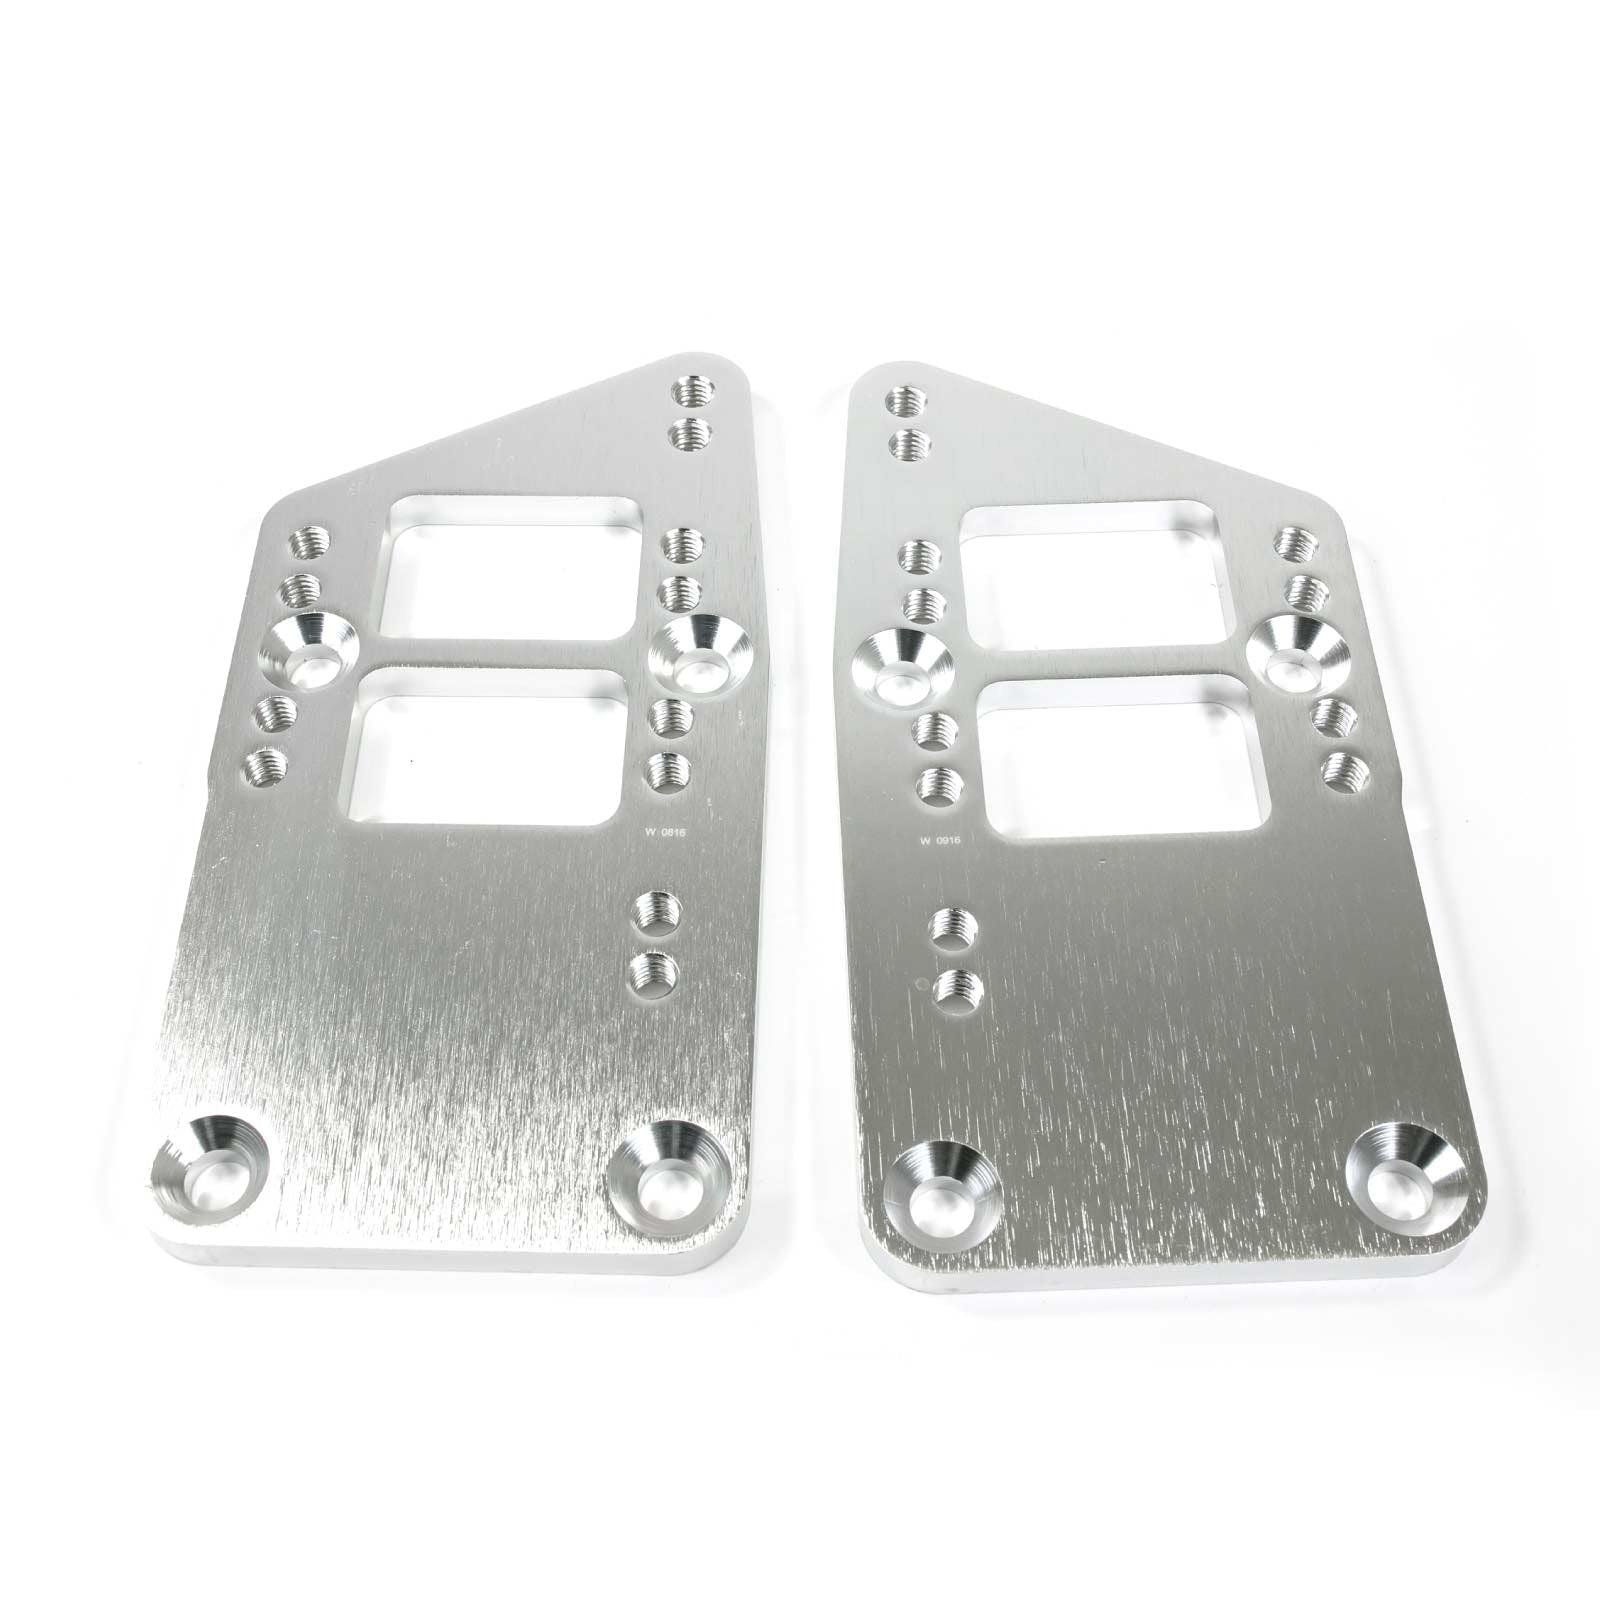 Top Street Performance 81100 LSX to Chevy SB Motor Mount Adapter Plate, Brushed Billet Aluminum